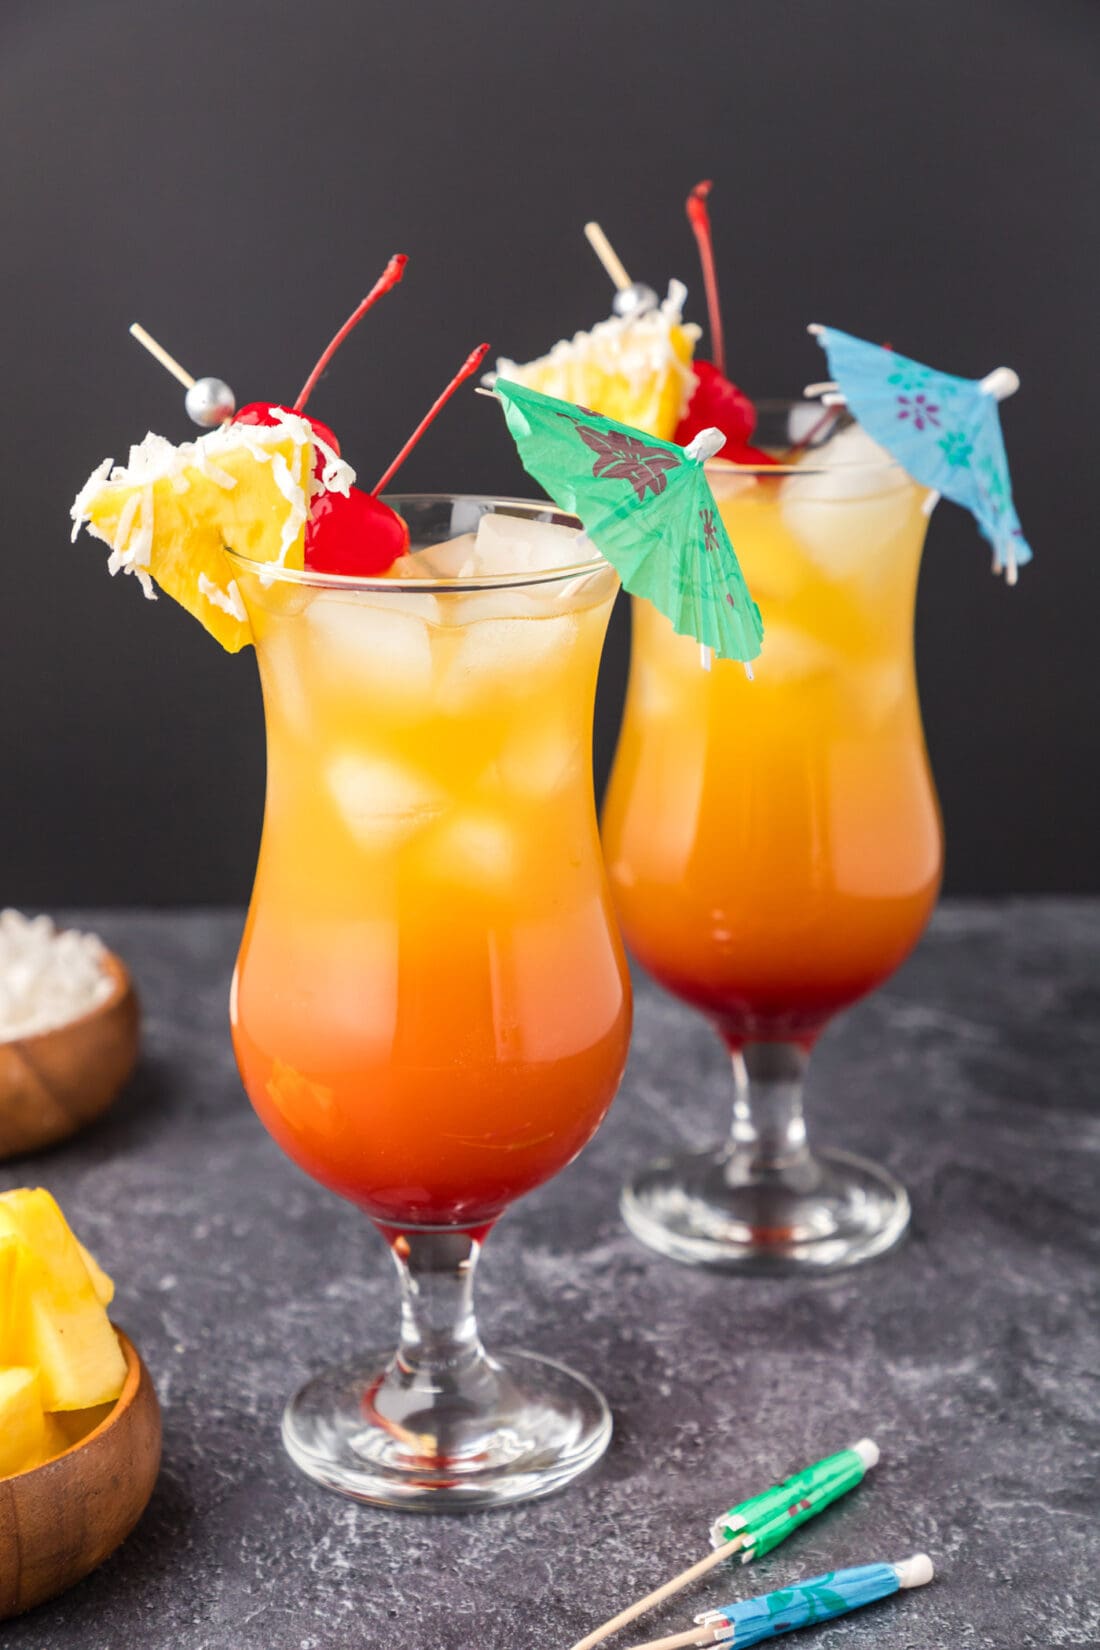 Two Malibu Sunset cocktails garnished with a pineapple wedge, cherry and umbrella